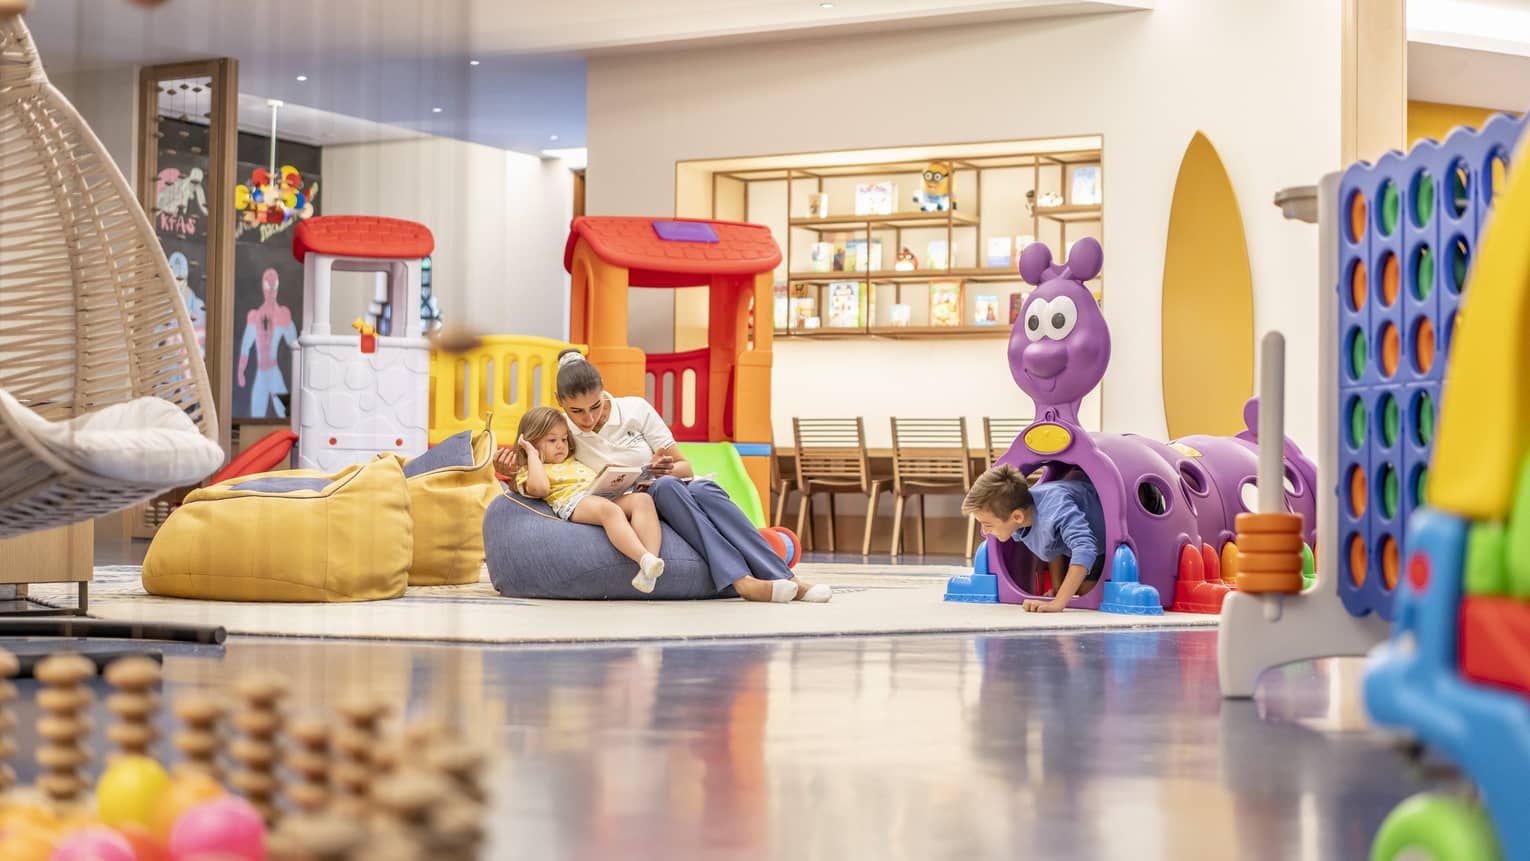 Kids playroom with colourful toys and bean-bag chairs